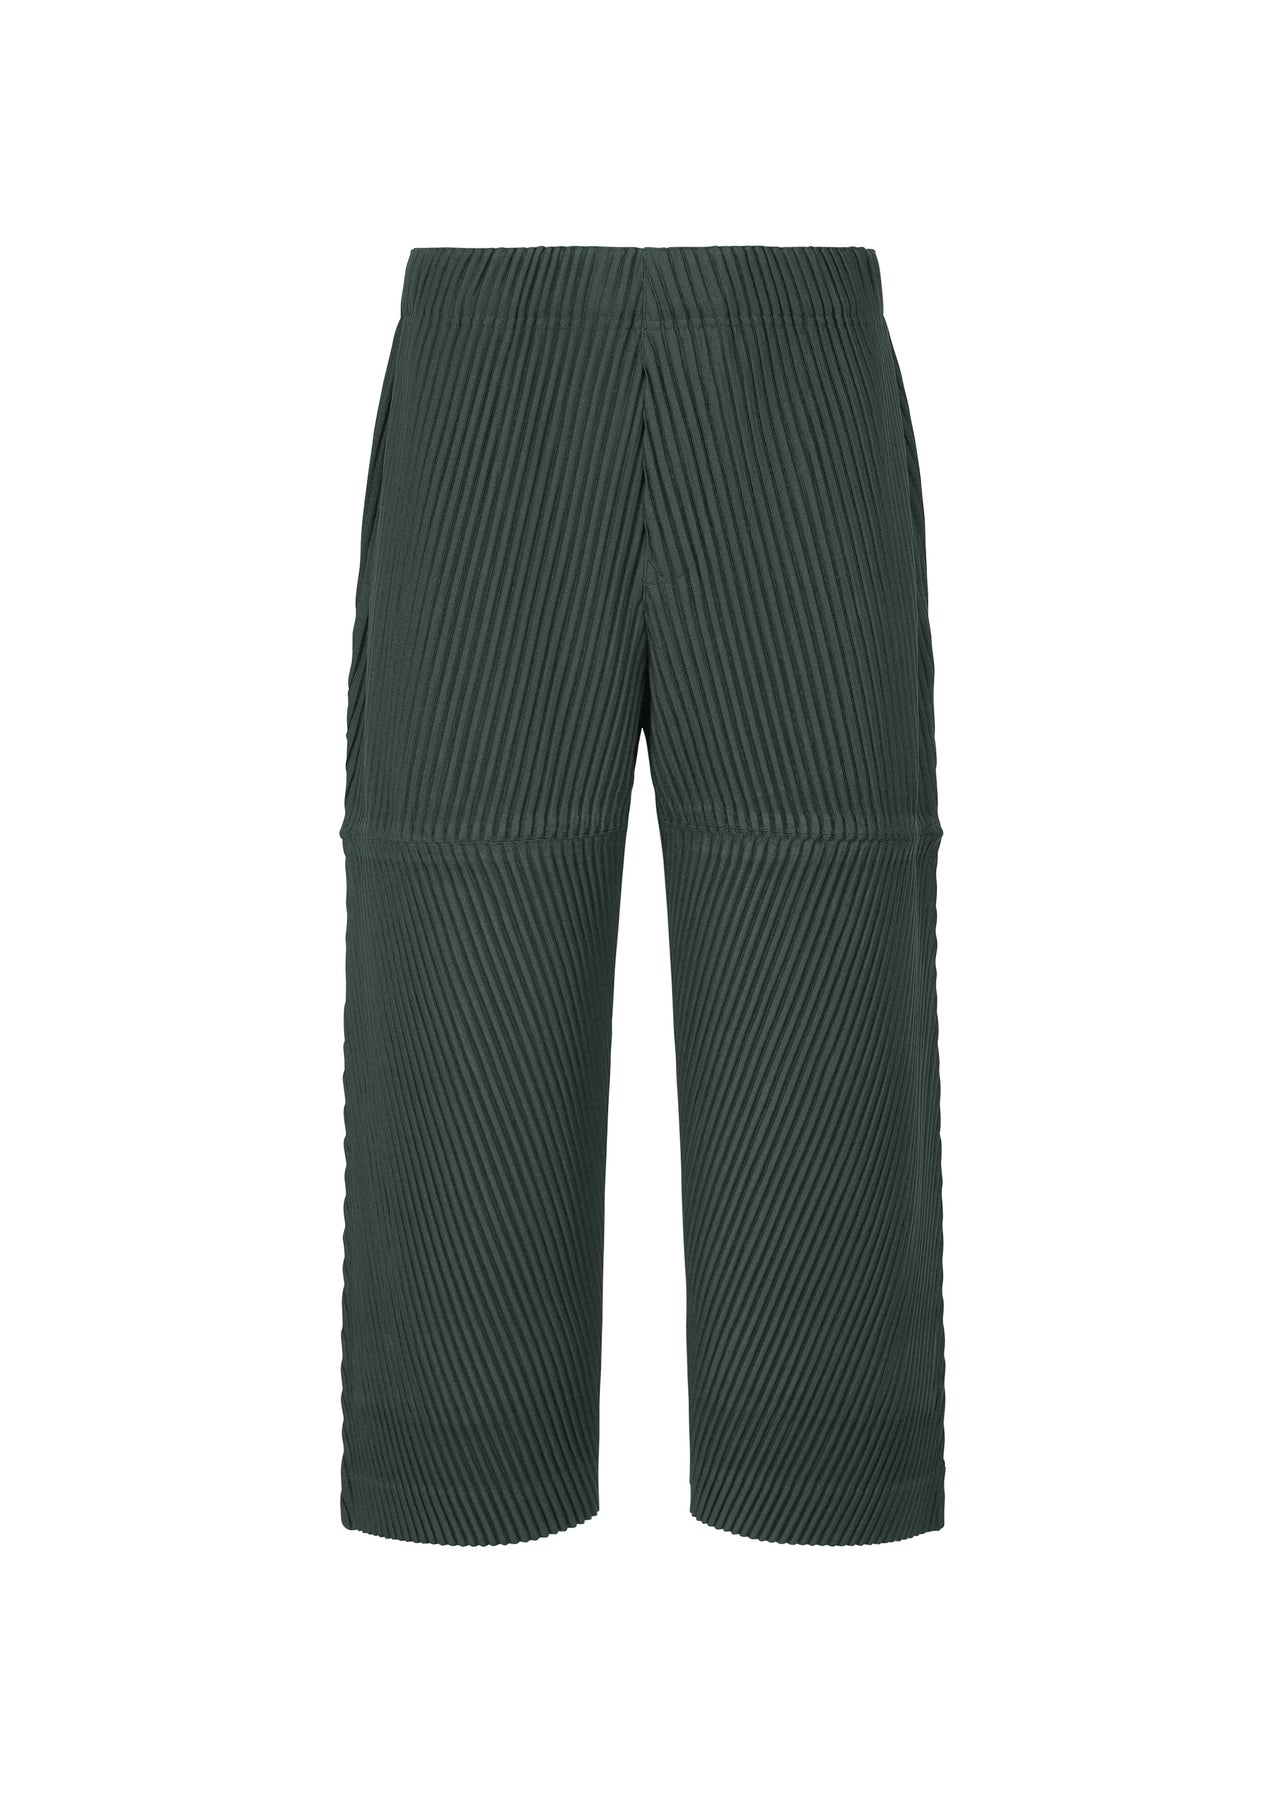 PLEATS BOTTOMS 1 PANTS | The official ISSEY MIYAKE ONLINE STORE 